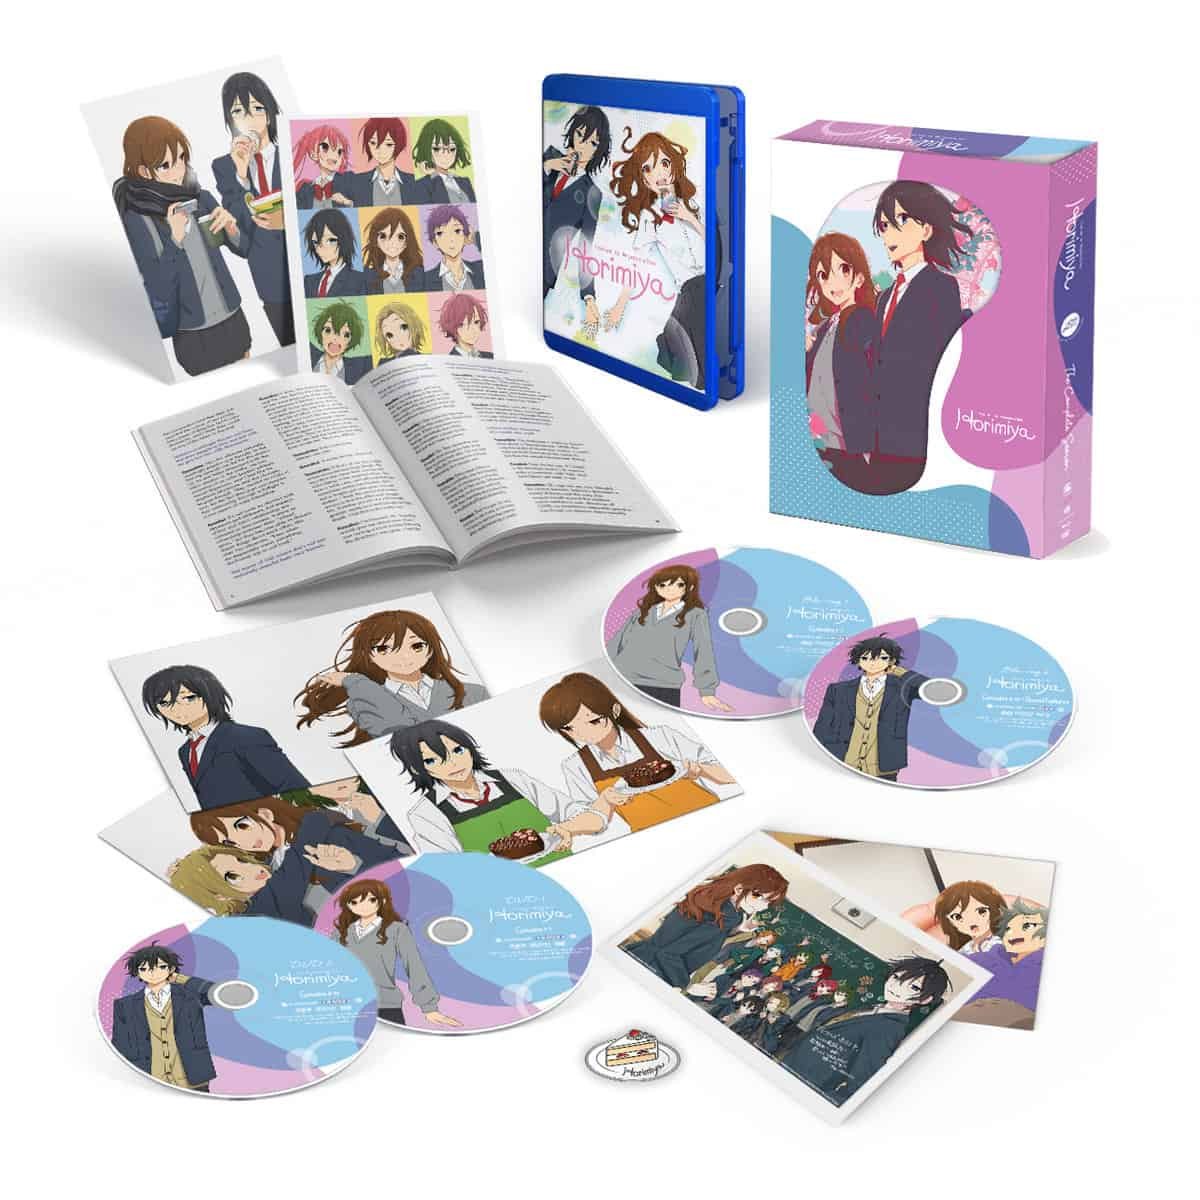 Crunchyroll Details Their February Home Video Releases